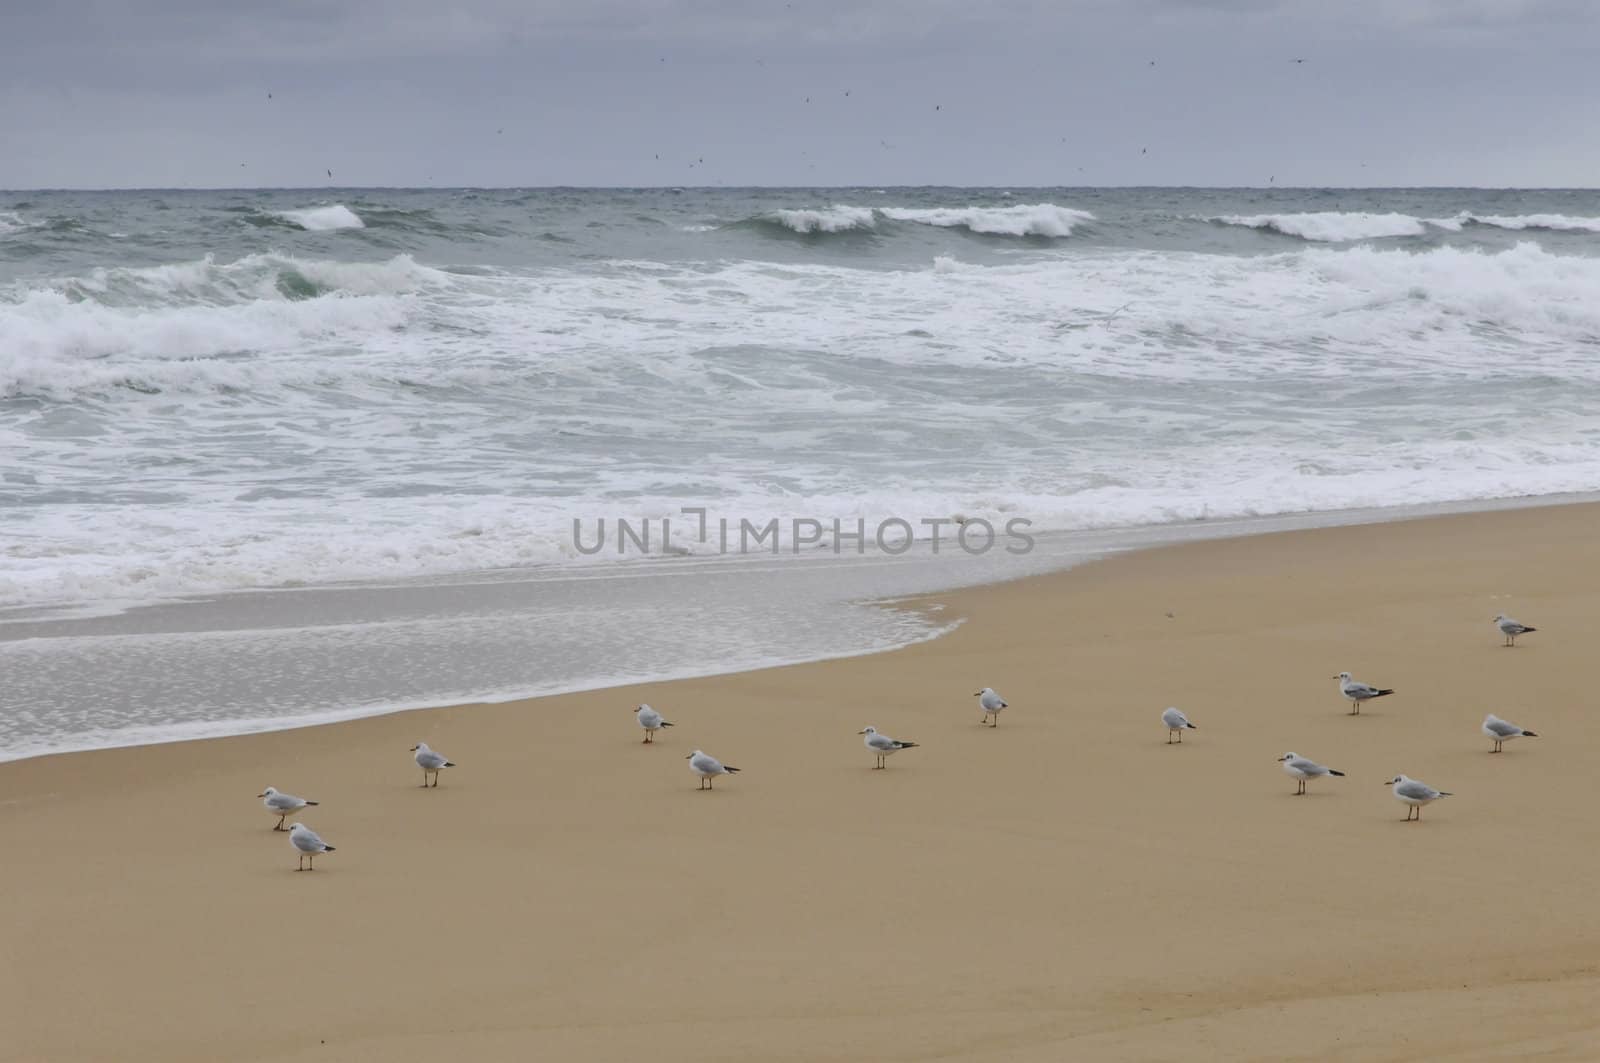 Some seagull on the beach during a cloudy day by shkyo30